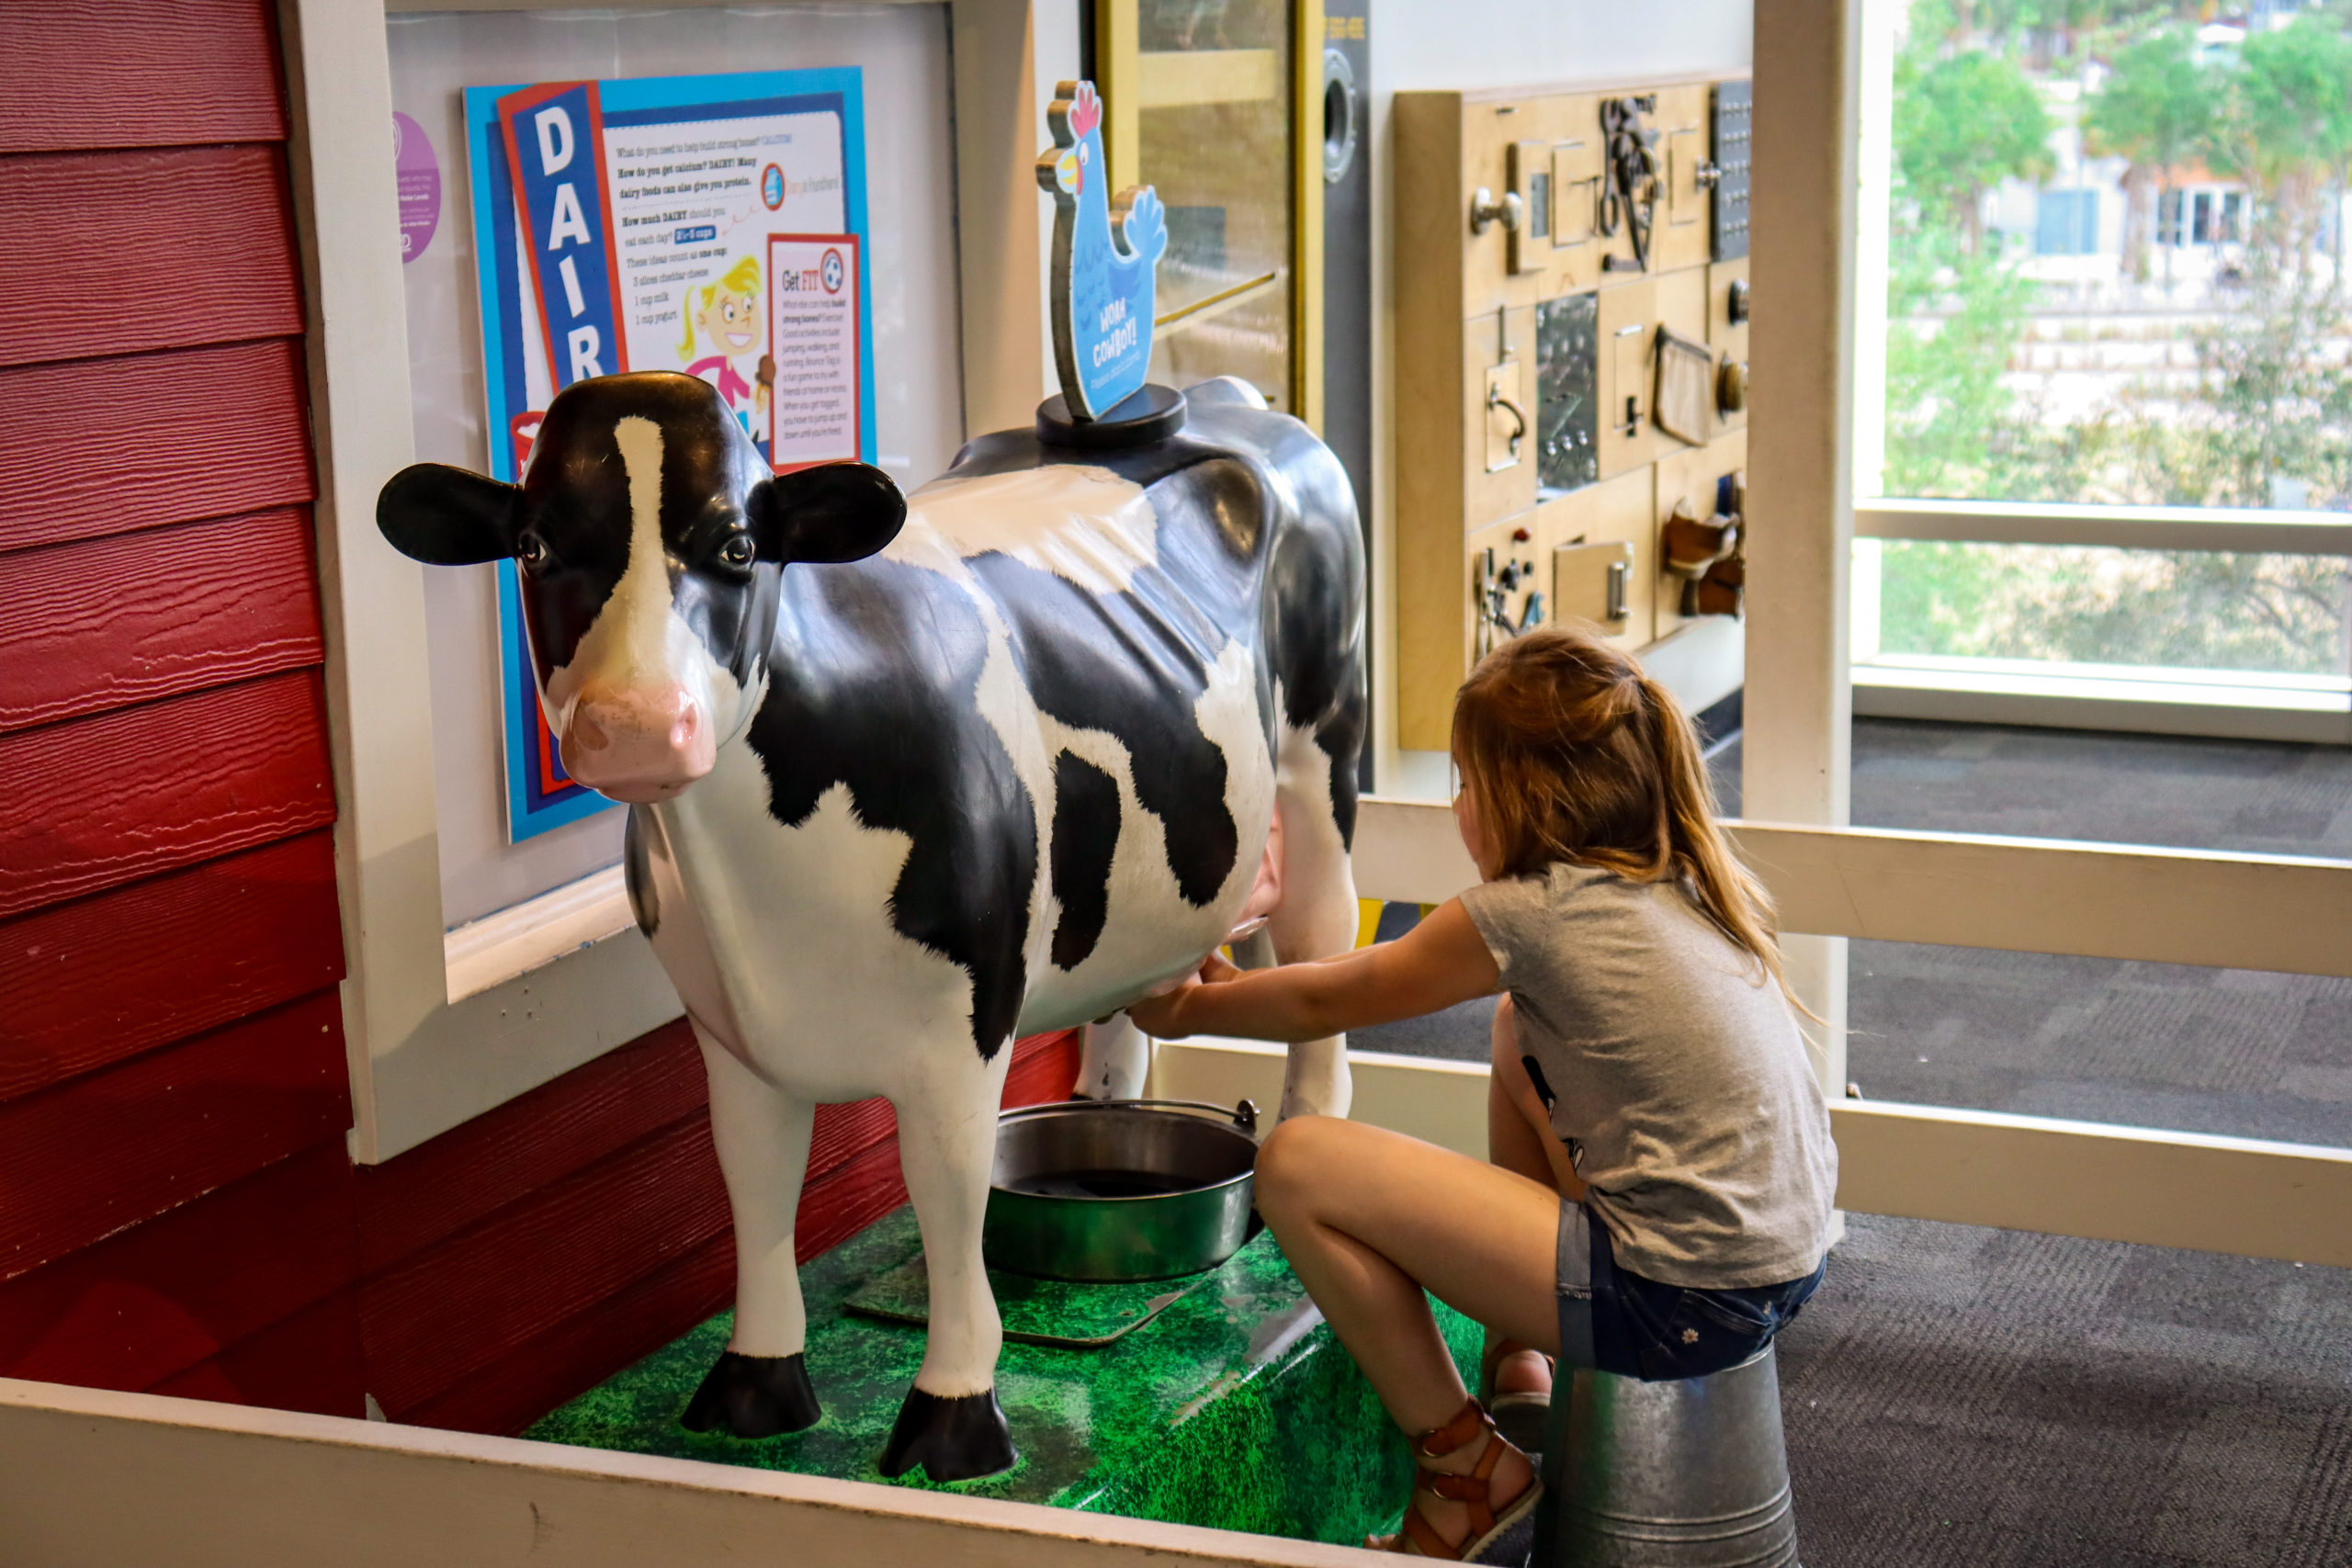 A young girl pretends to milk a cow at a farm exhibit at Glazer Children's Museum, one of the best things to do in Tampa Bay with kids.